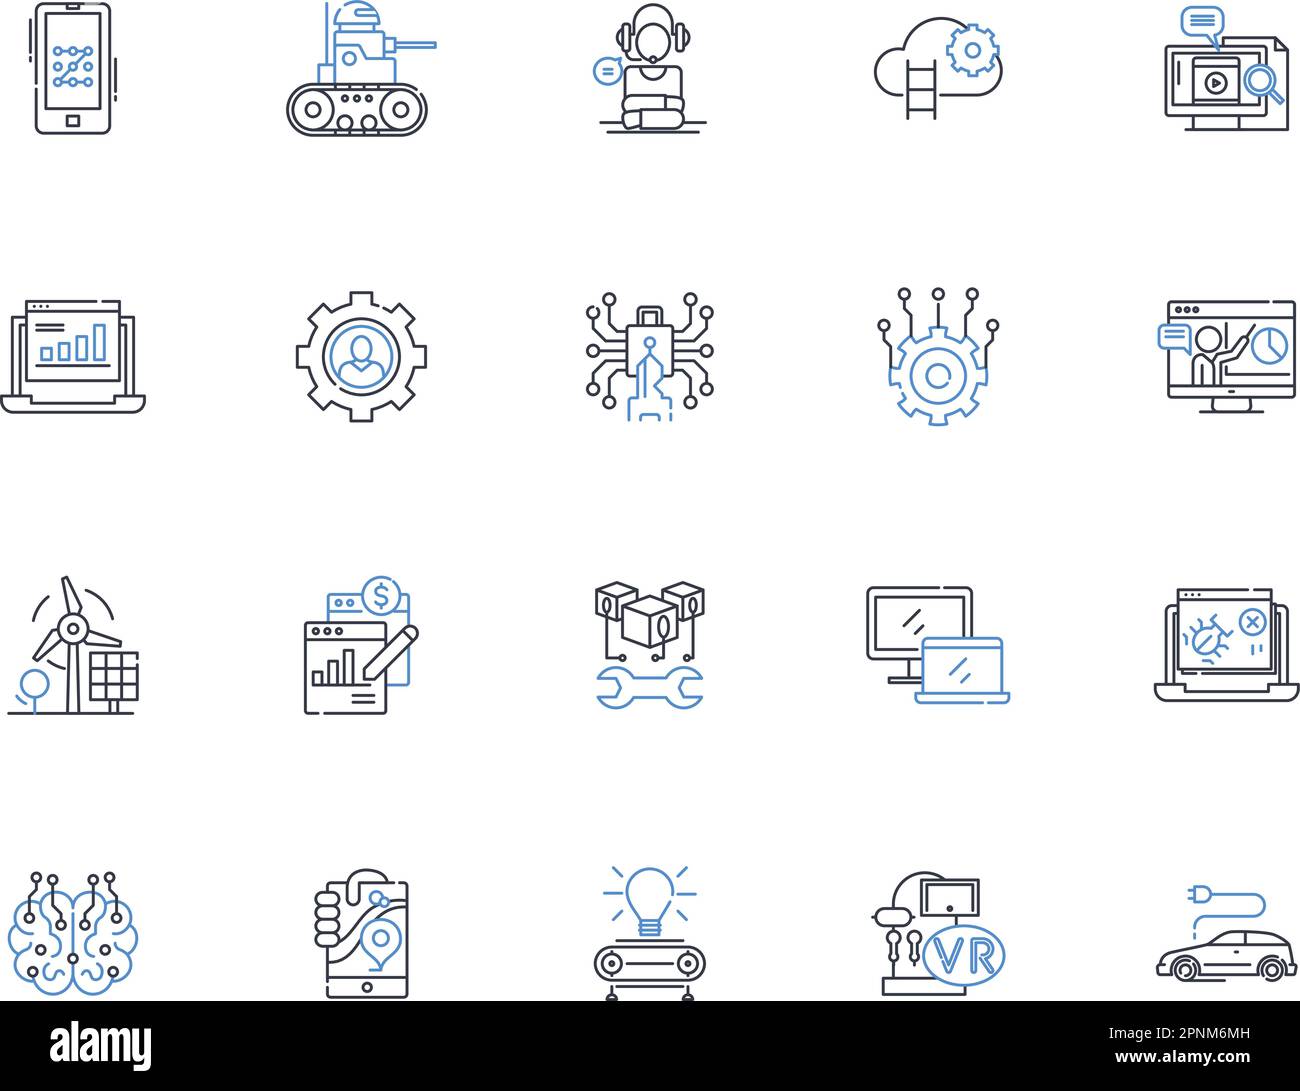 Systematization line icons collection. Optimization, Organization, Standardization, Efficiency, Streamlining, Rationalization, Automation vector and Stock Vector